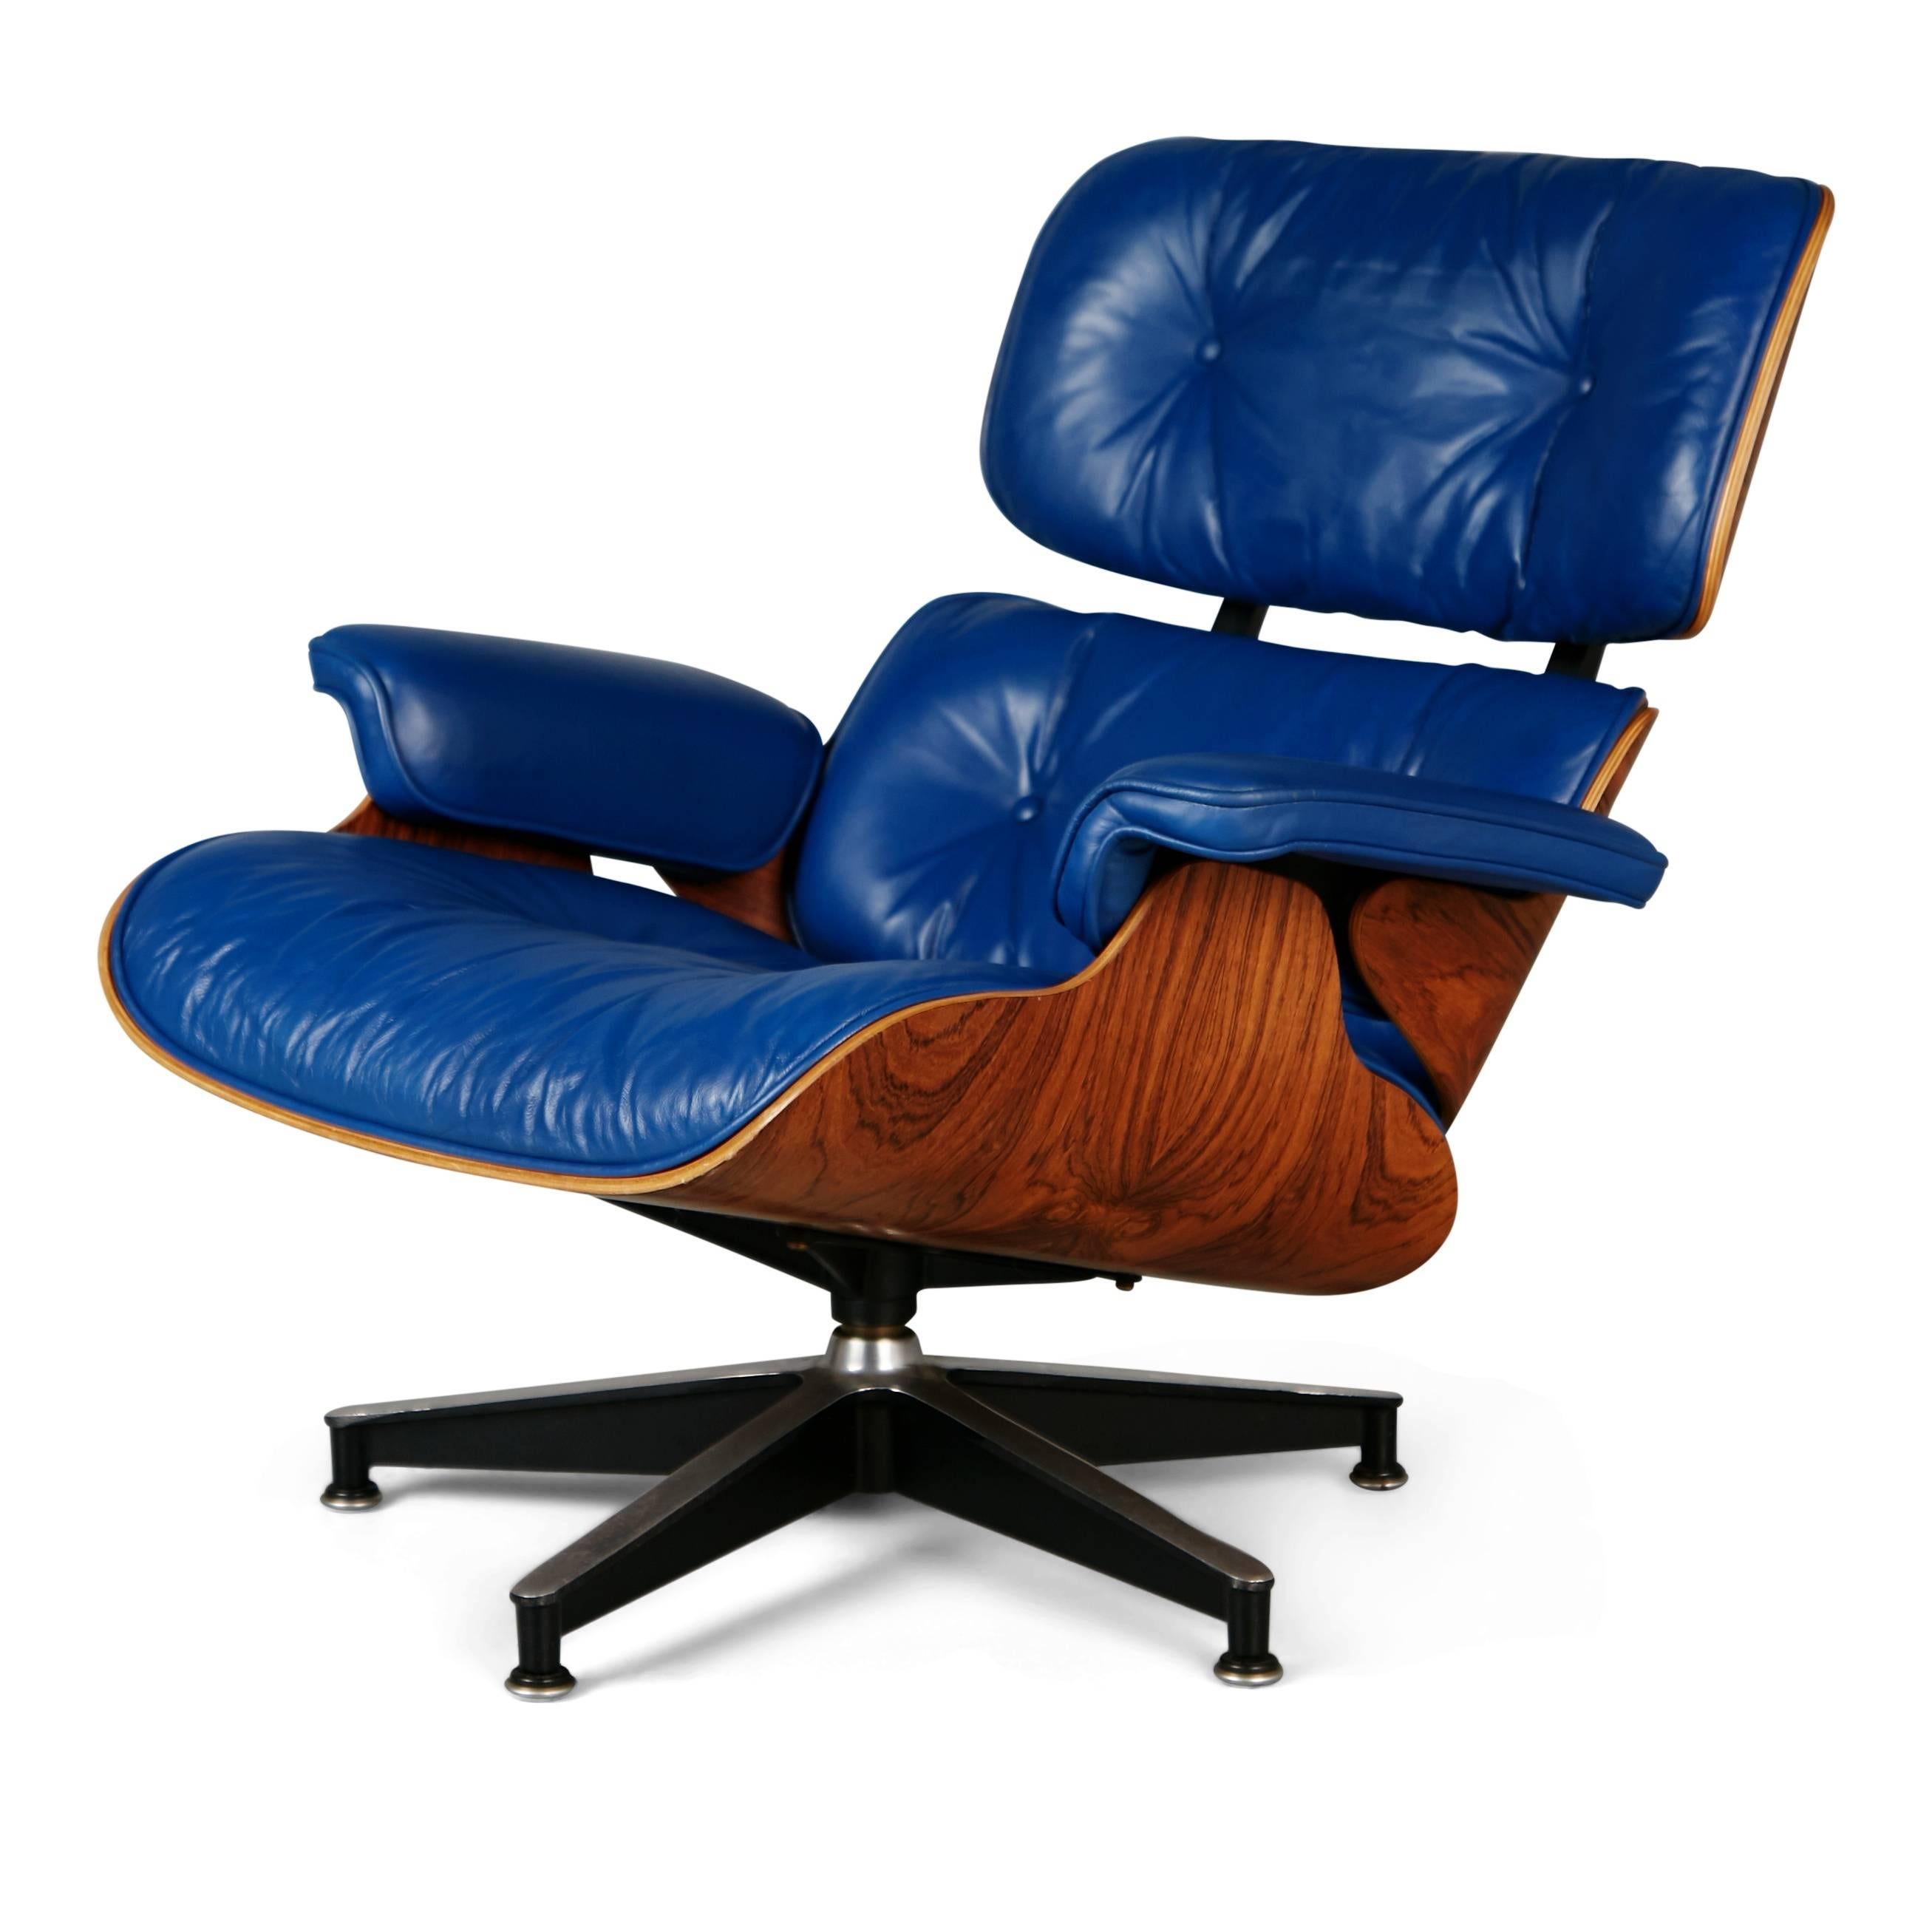 Mid-Century Modern Blue Leather and Rosewood Eames Lounge Chair 670 for Herman Miller, circa 1960